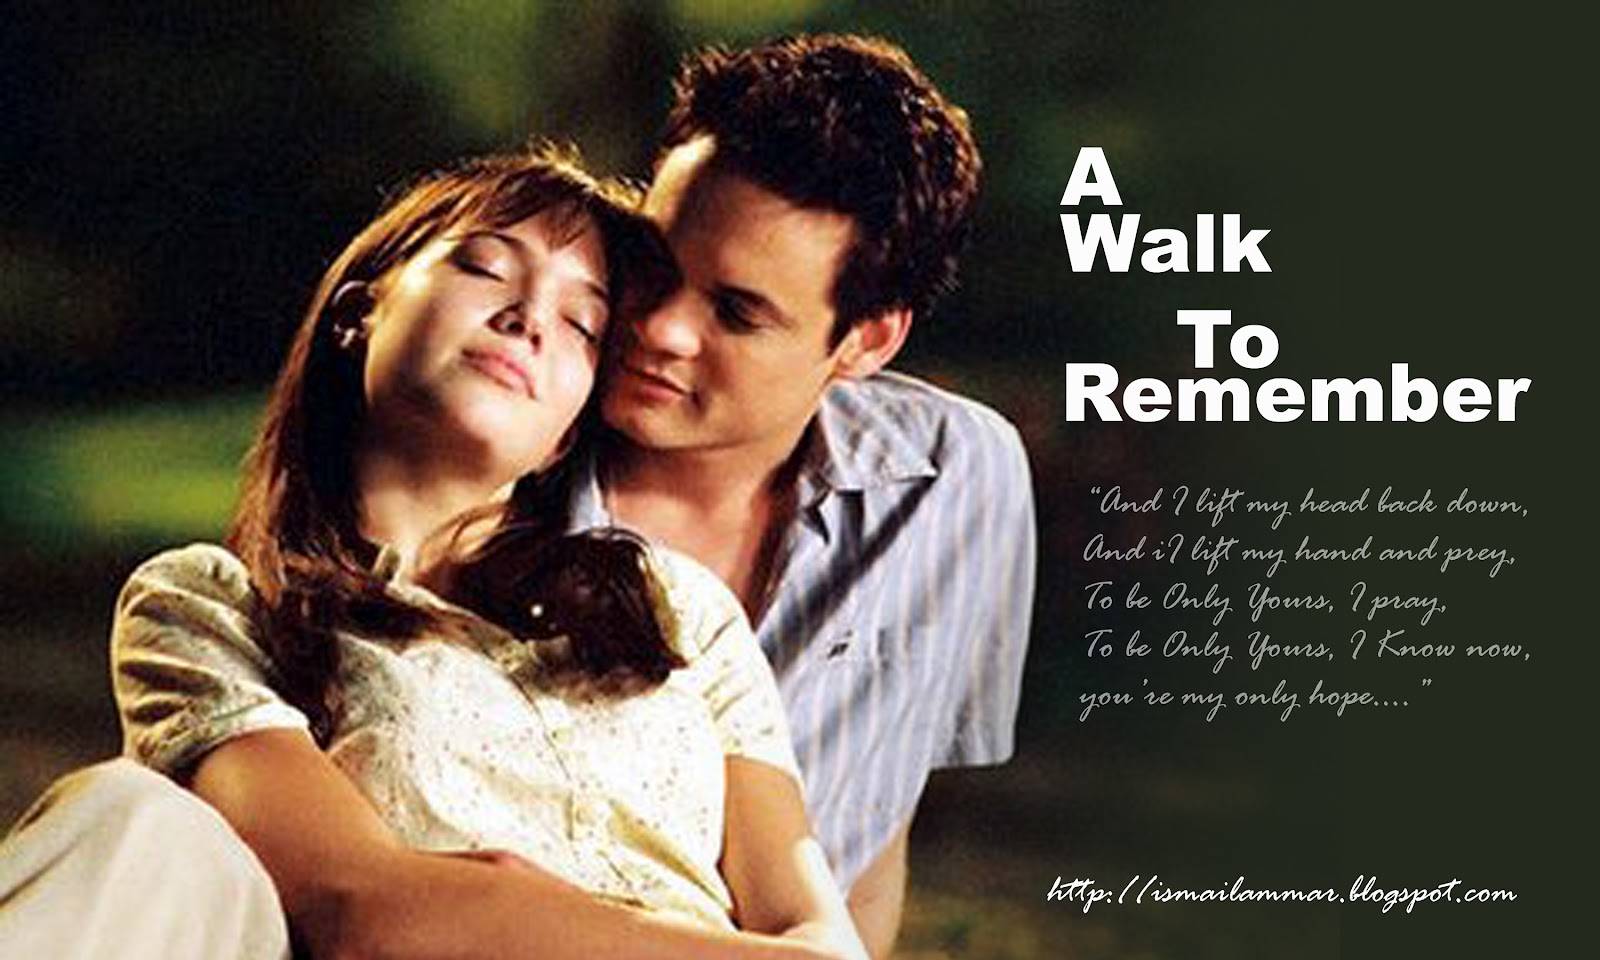 A walk to remember wallpapers